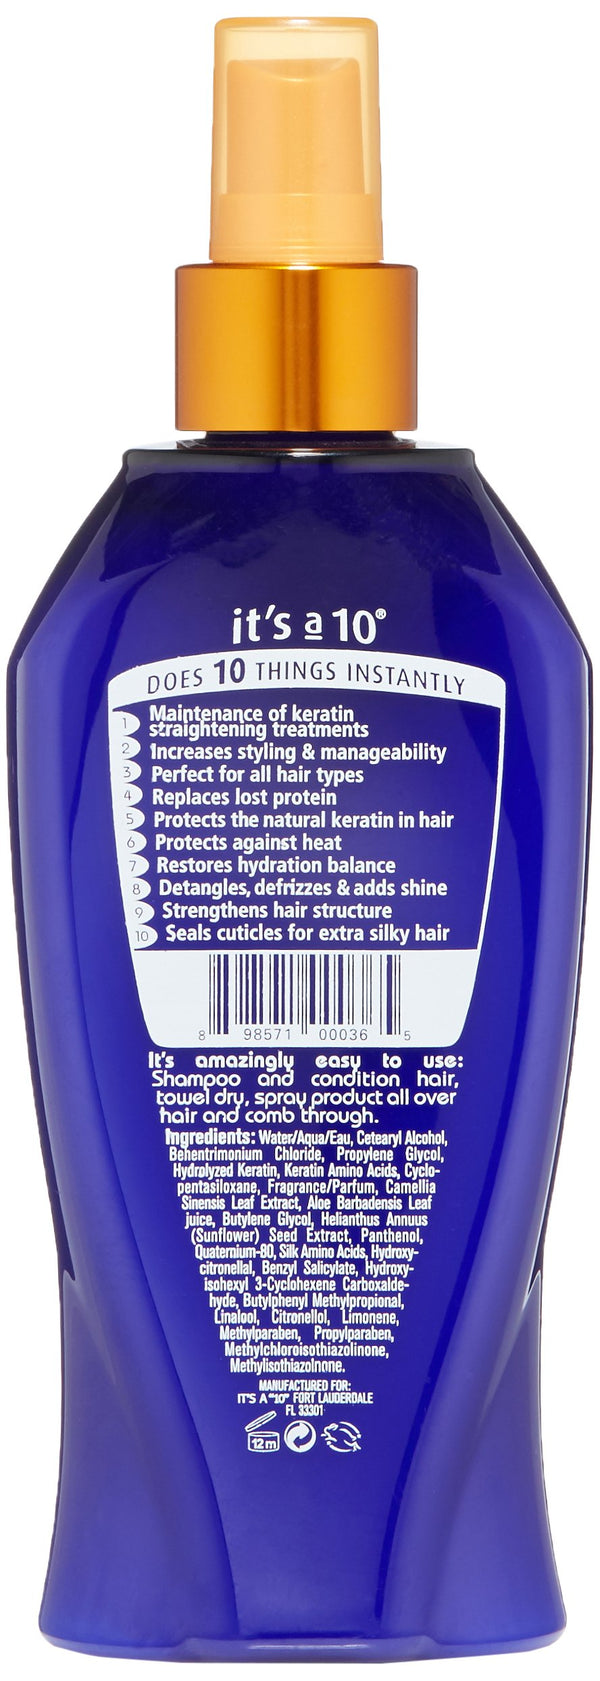 It's a 10 Haircare Miracle Leave-In Plus Keratin, 10 fl. oz.